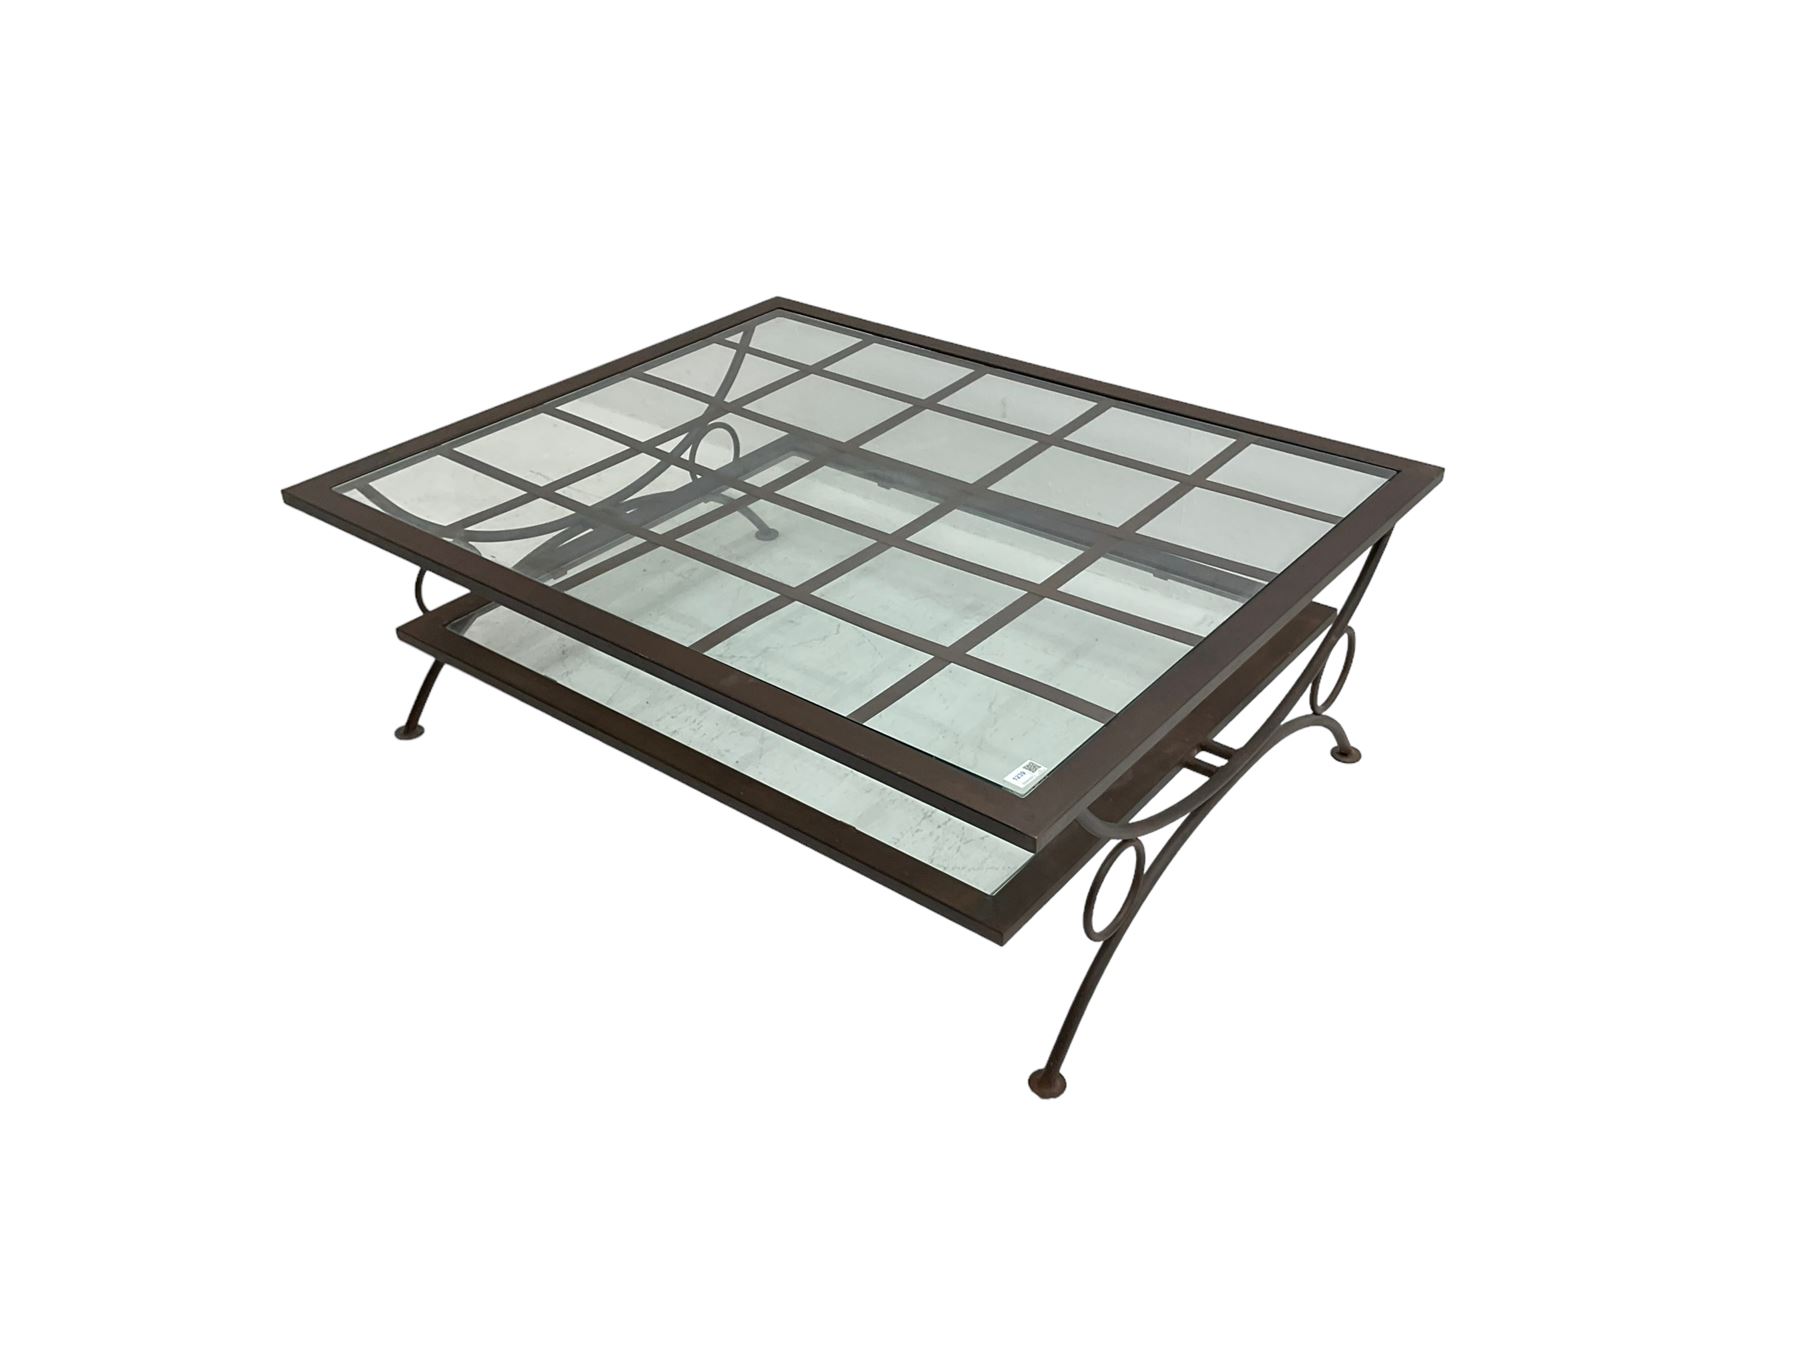 Wrought metal coffee table - Image 4 of 6